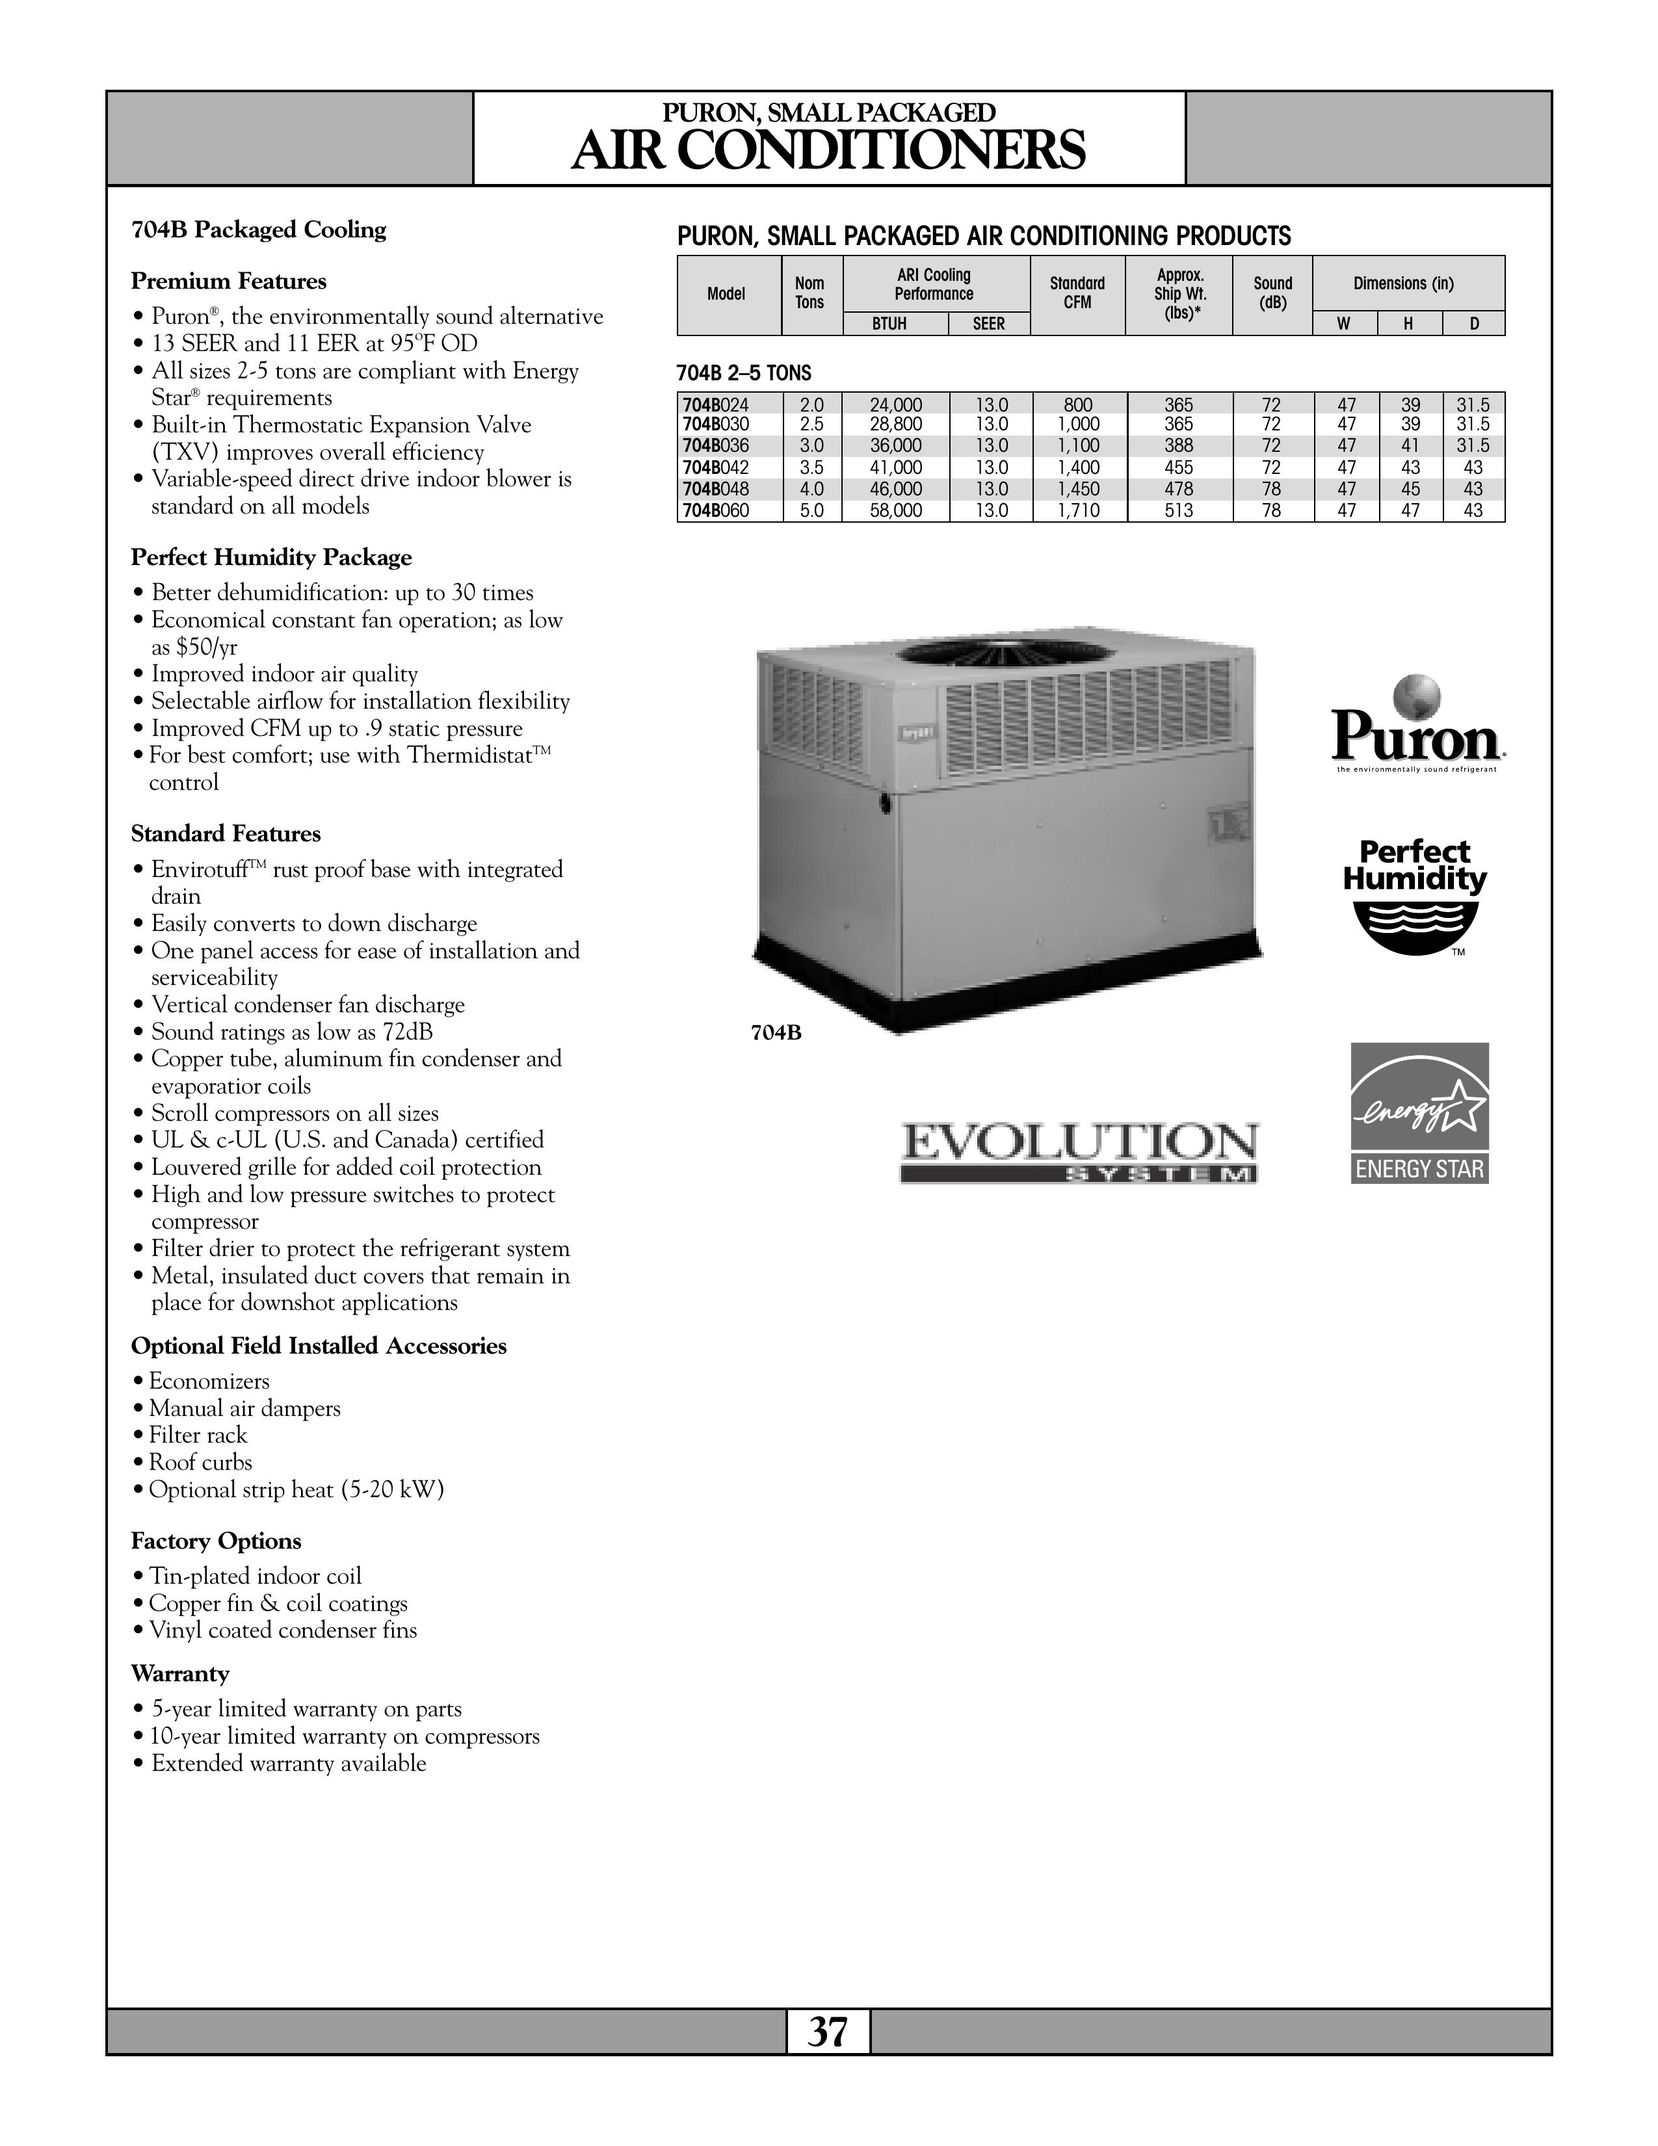 Revolutionary Cooling Systems 704B060 Air Conditioner User Manual